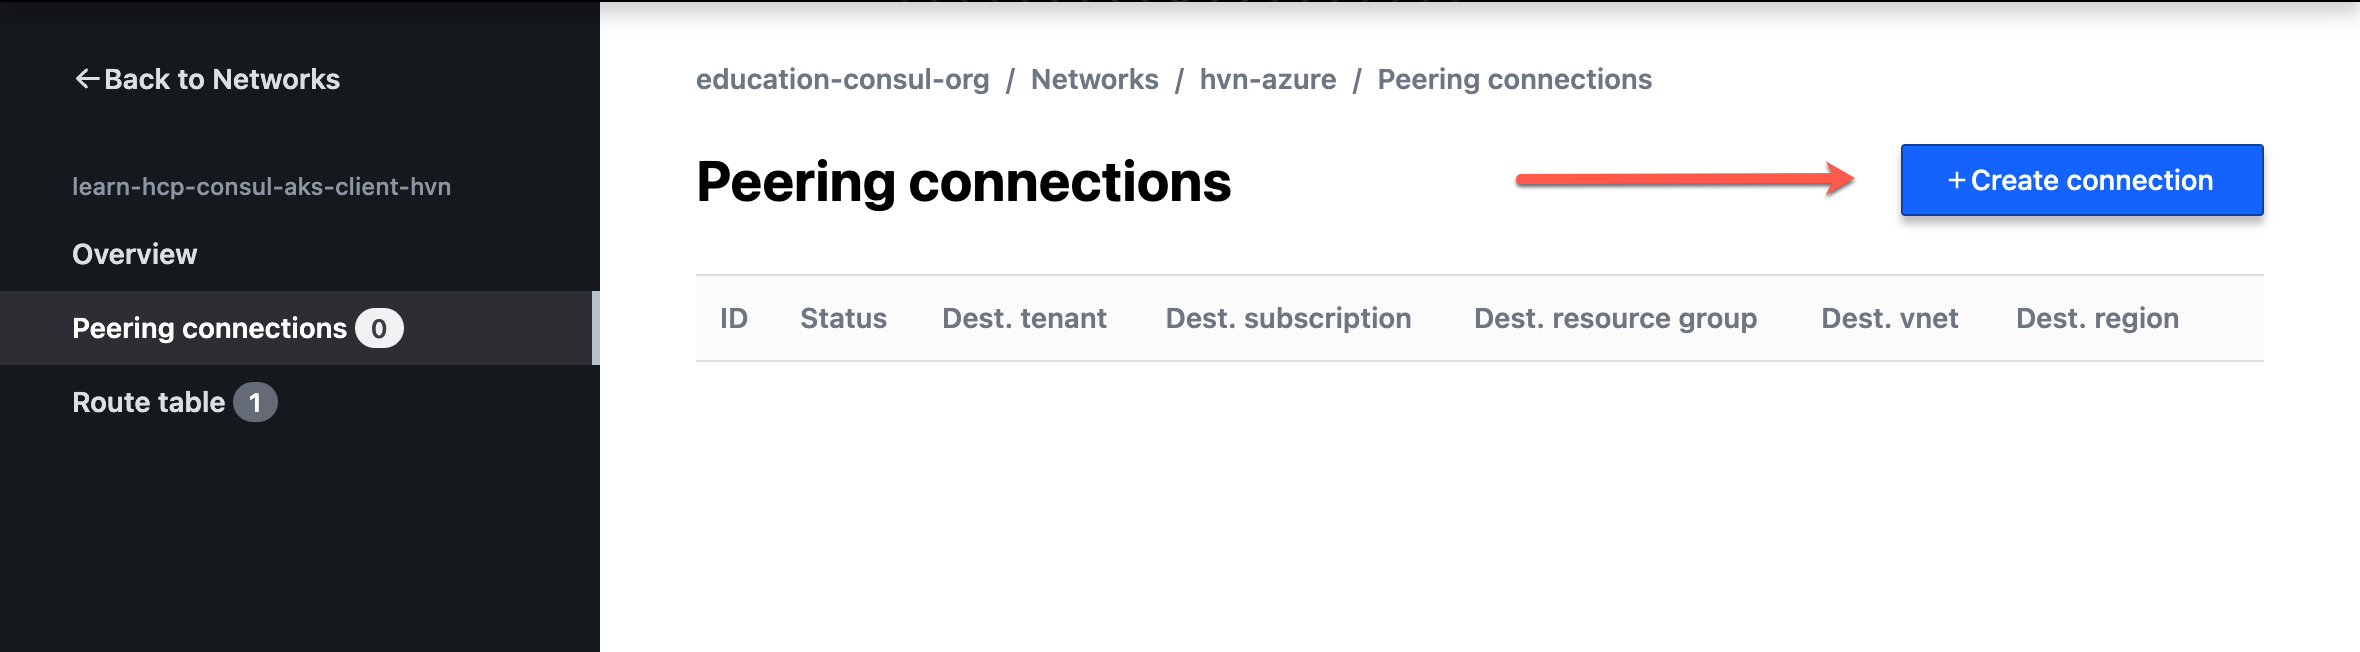 HVN Peering connections overview list with an arrow pointing to the "Create Connection" button